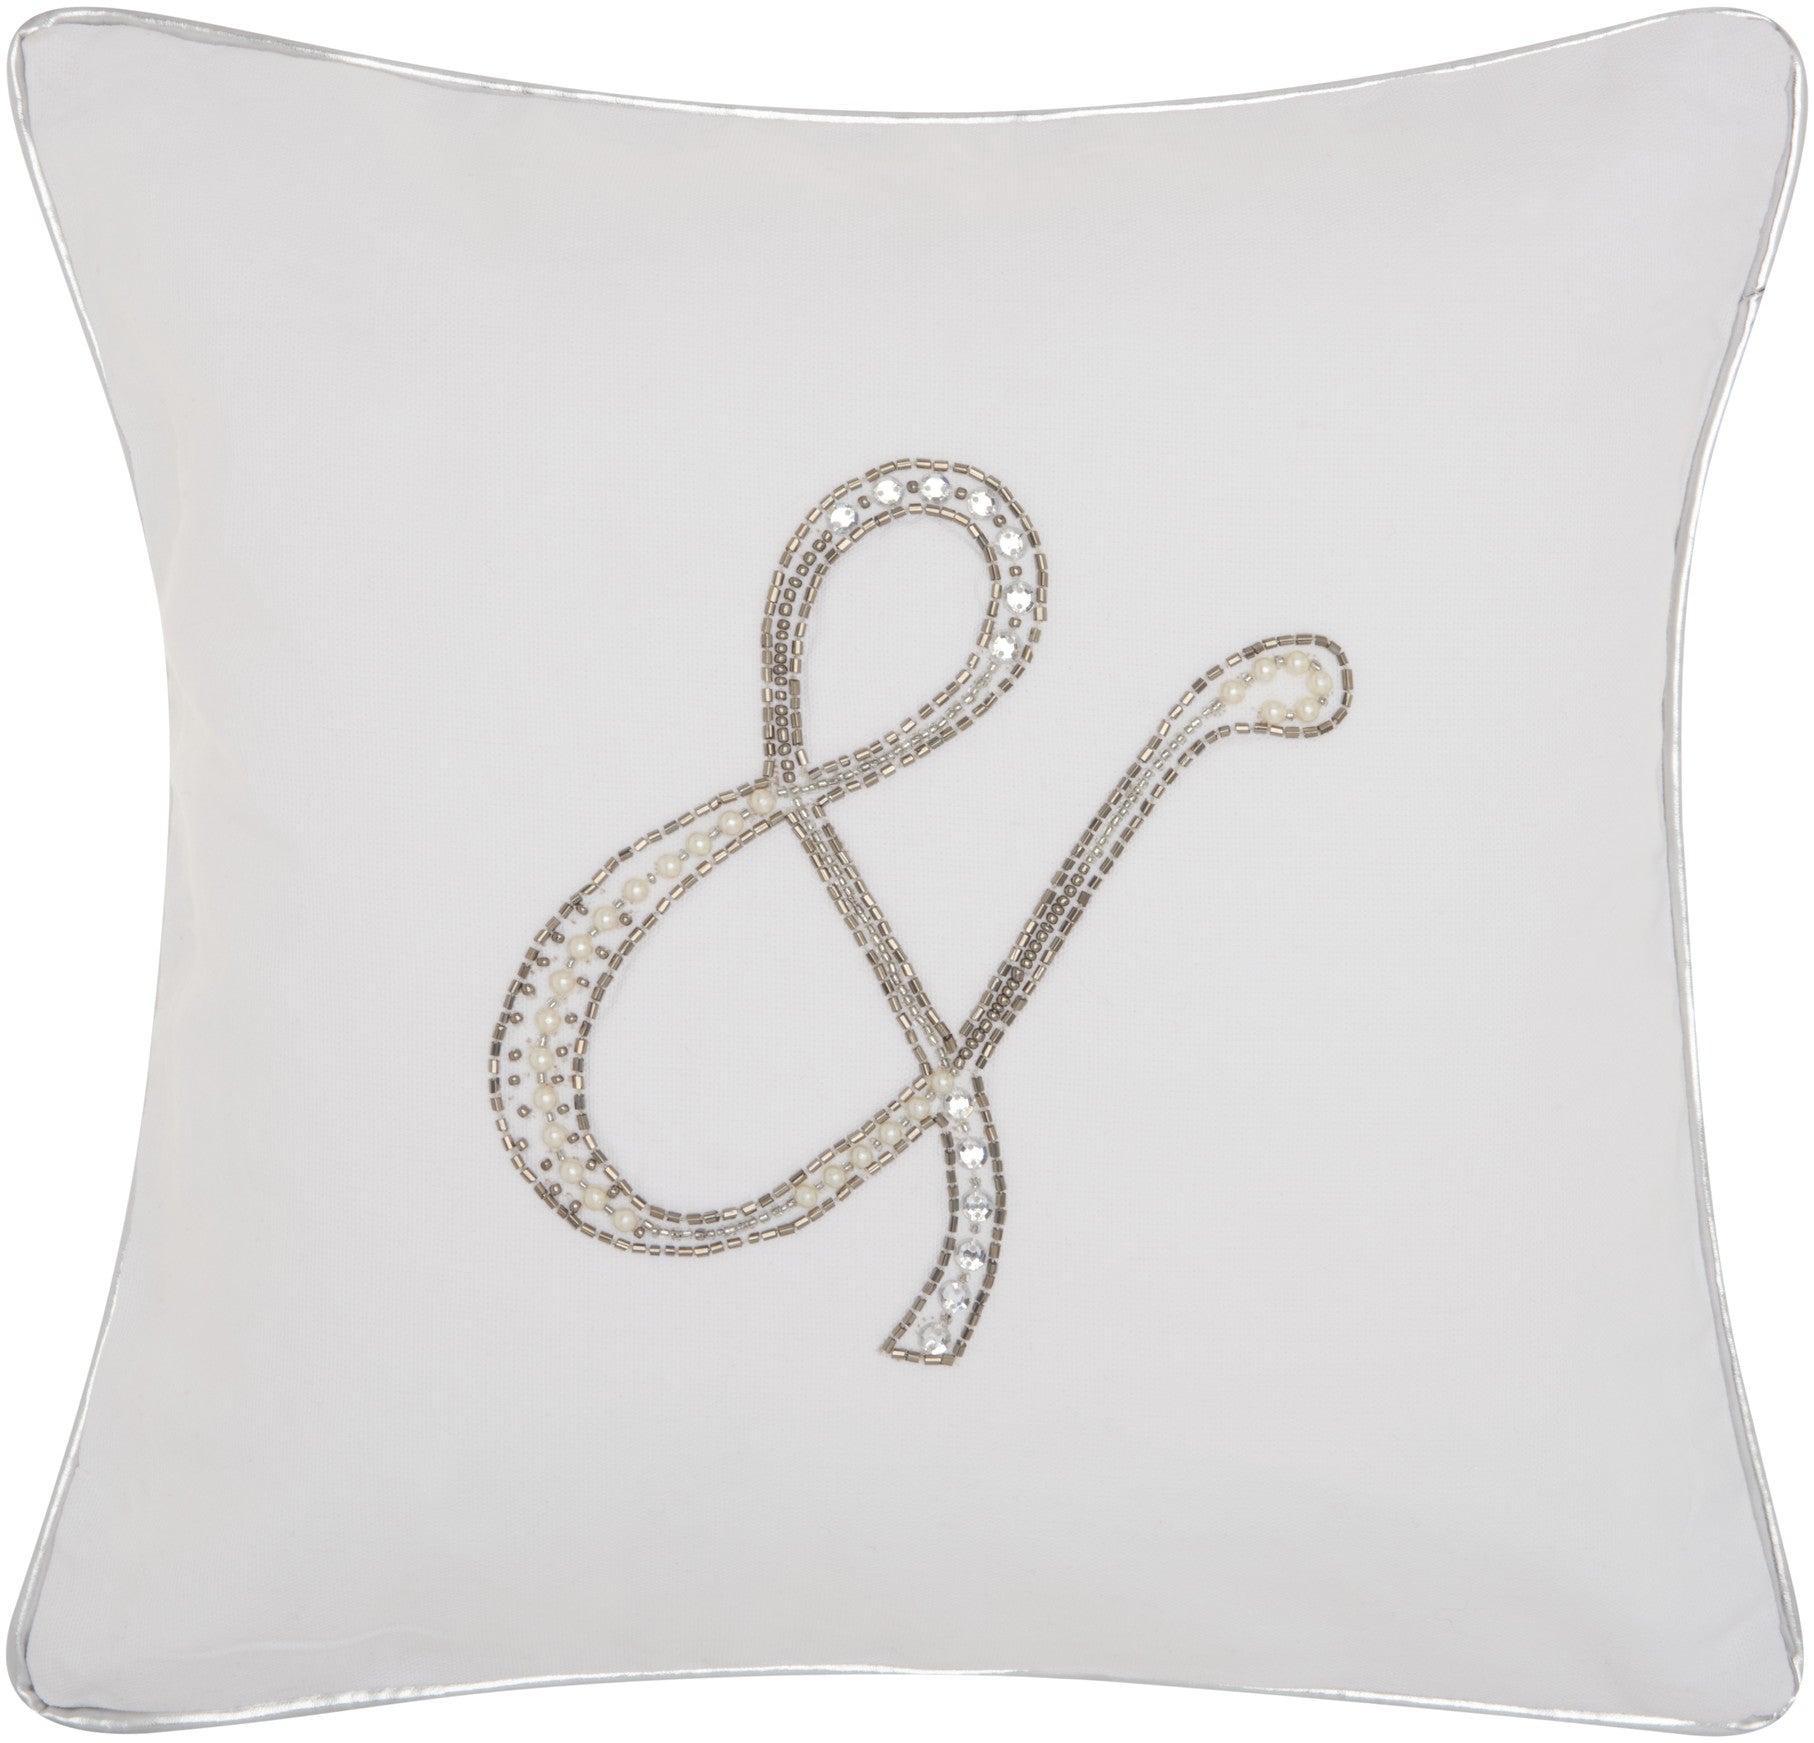 Kathy Ireland Pillow E6317 Cotton Beaded & Ampersand Throw Pillow From Kathy Ireland By Nourison Rugs | Throw Pillow